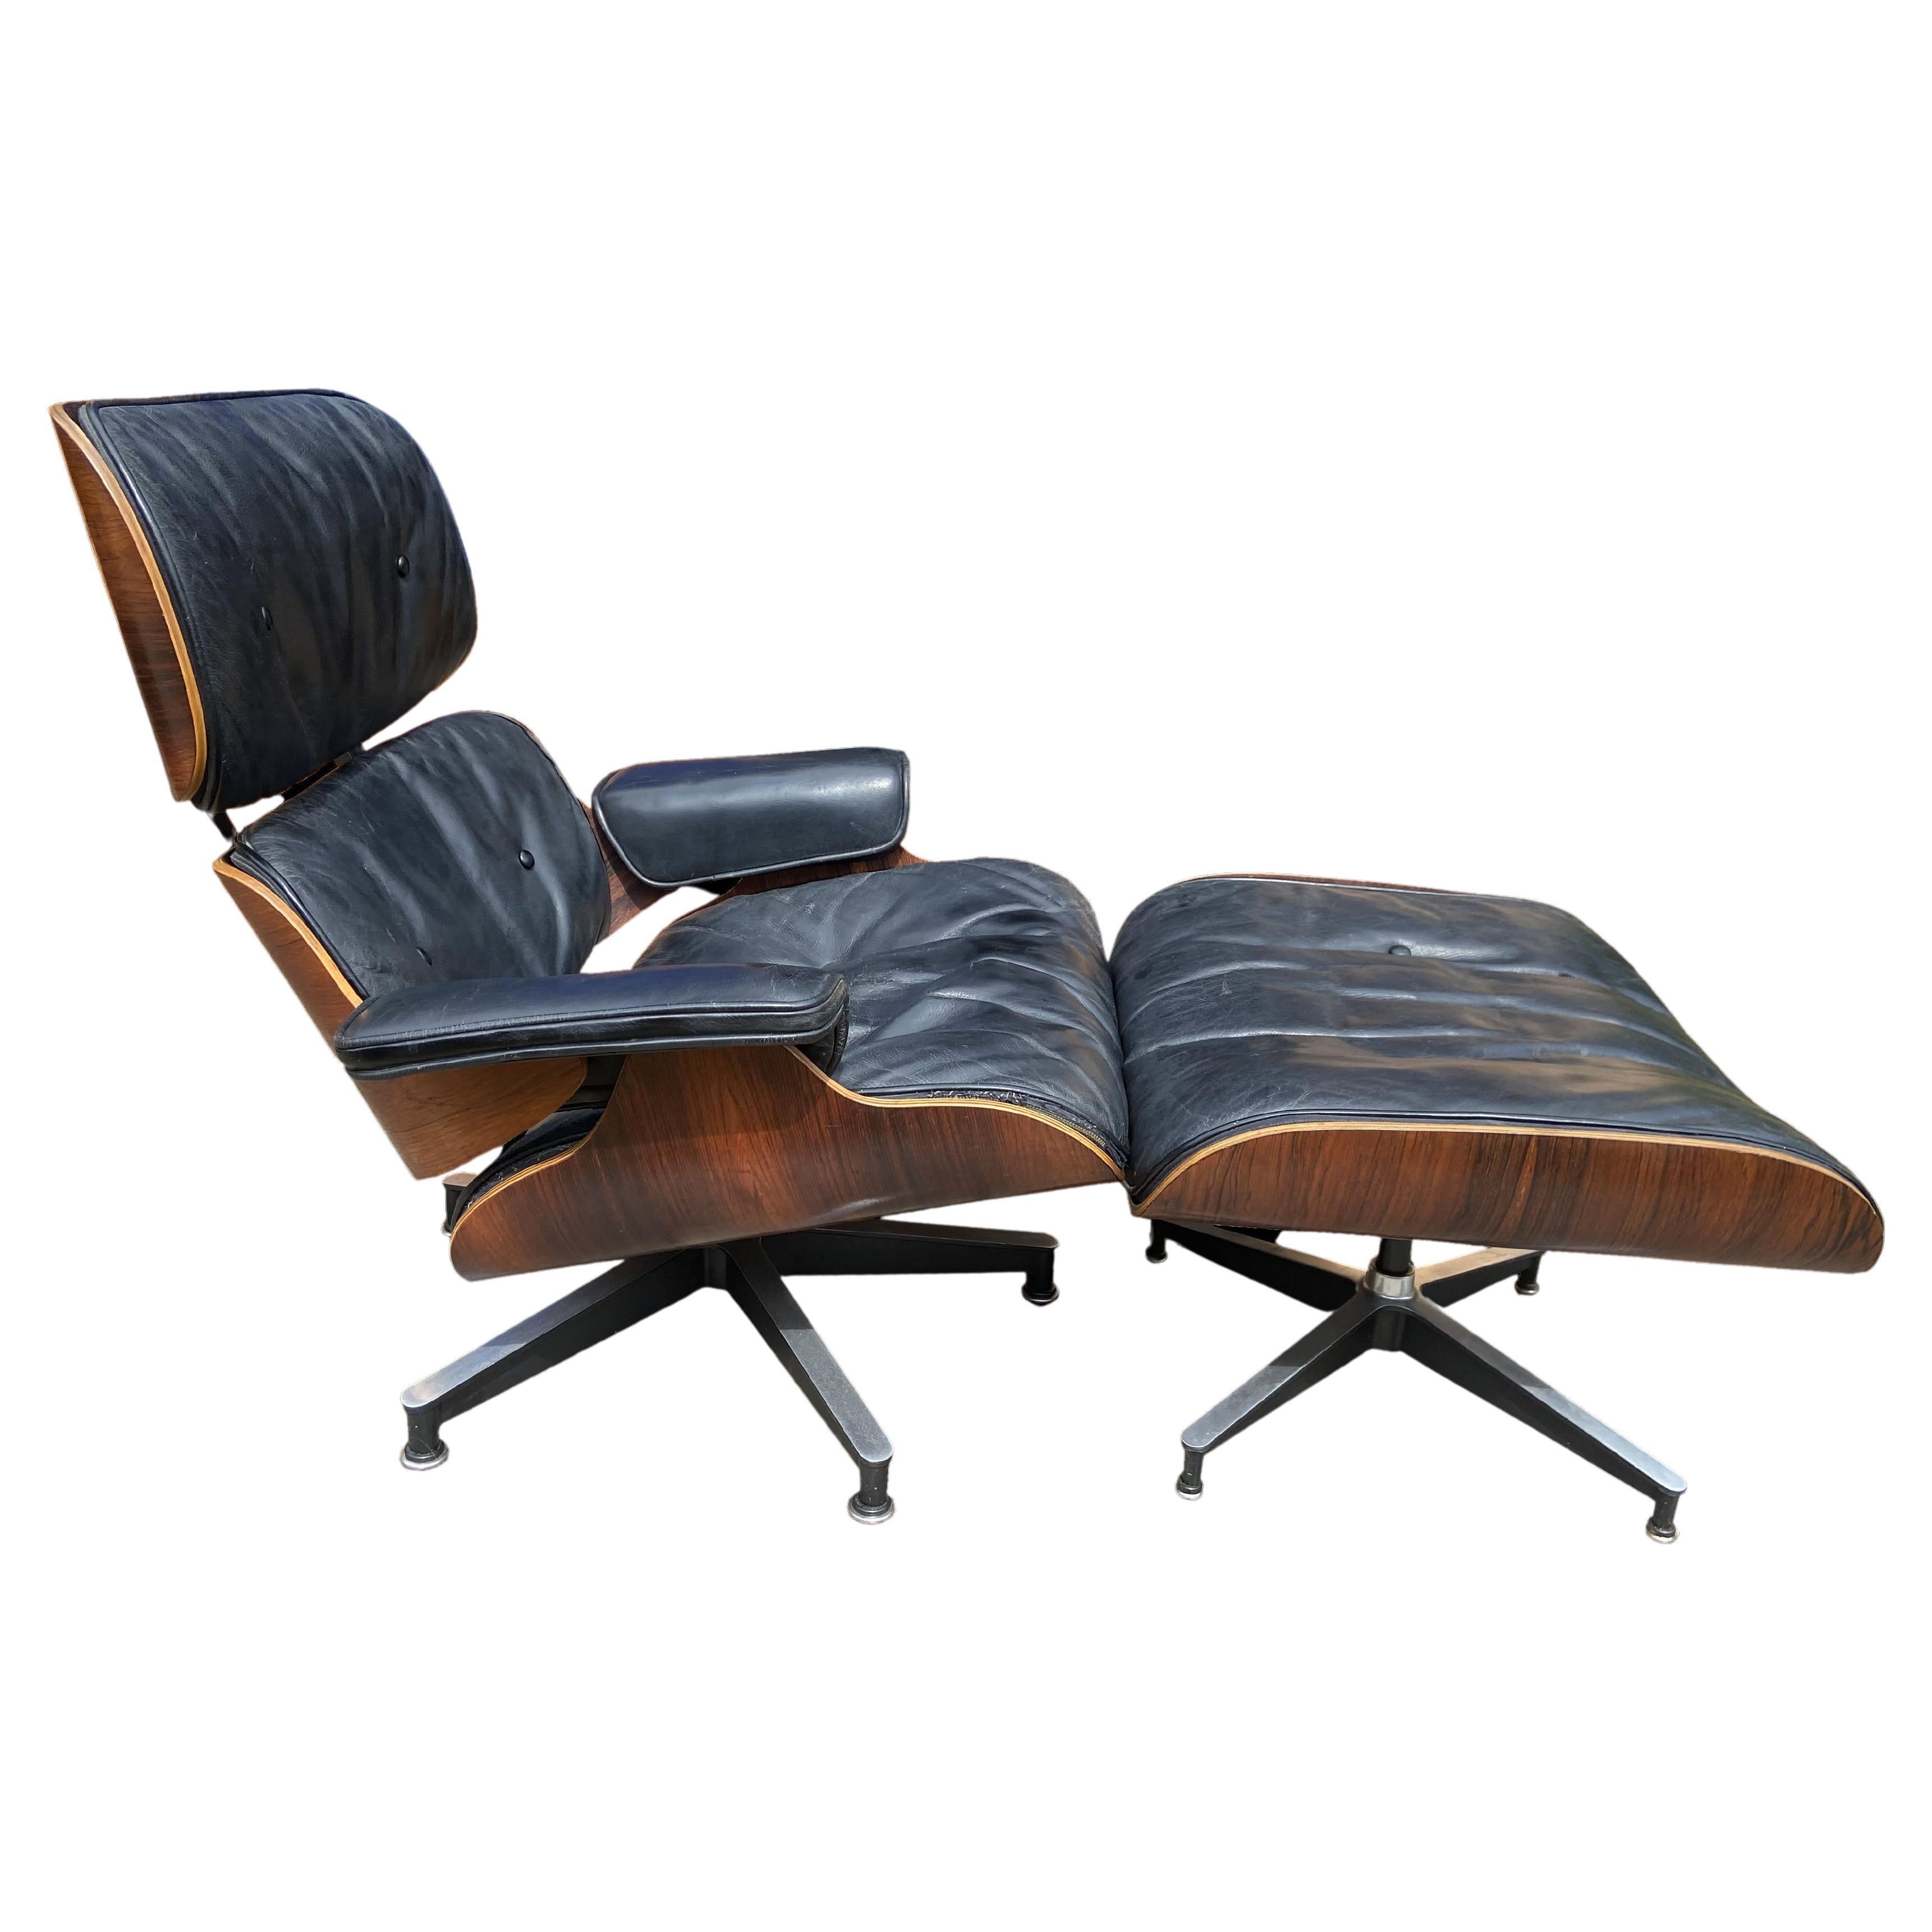 Lounge Chair and Ottoman '670 & 671' by Charles and Ray Eames for Herman Miller